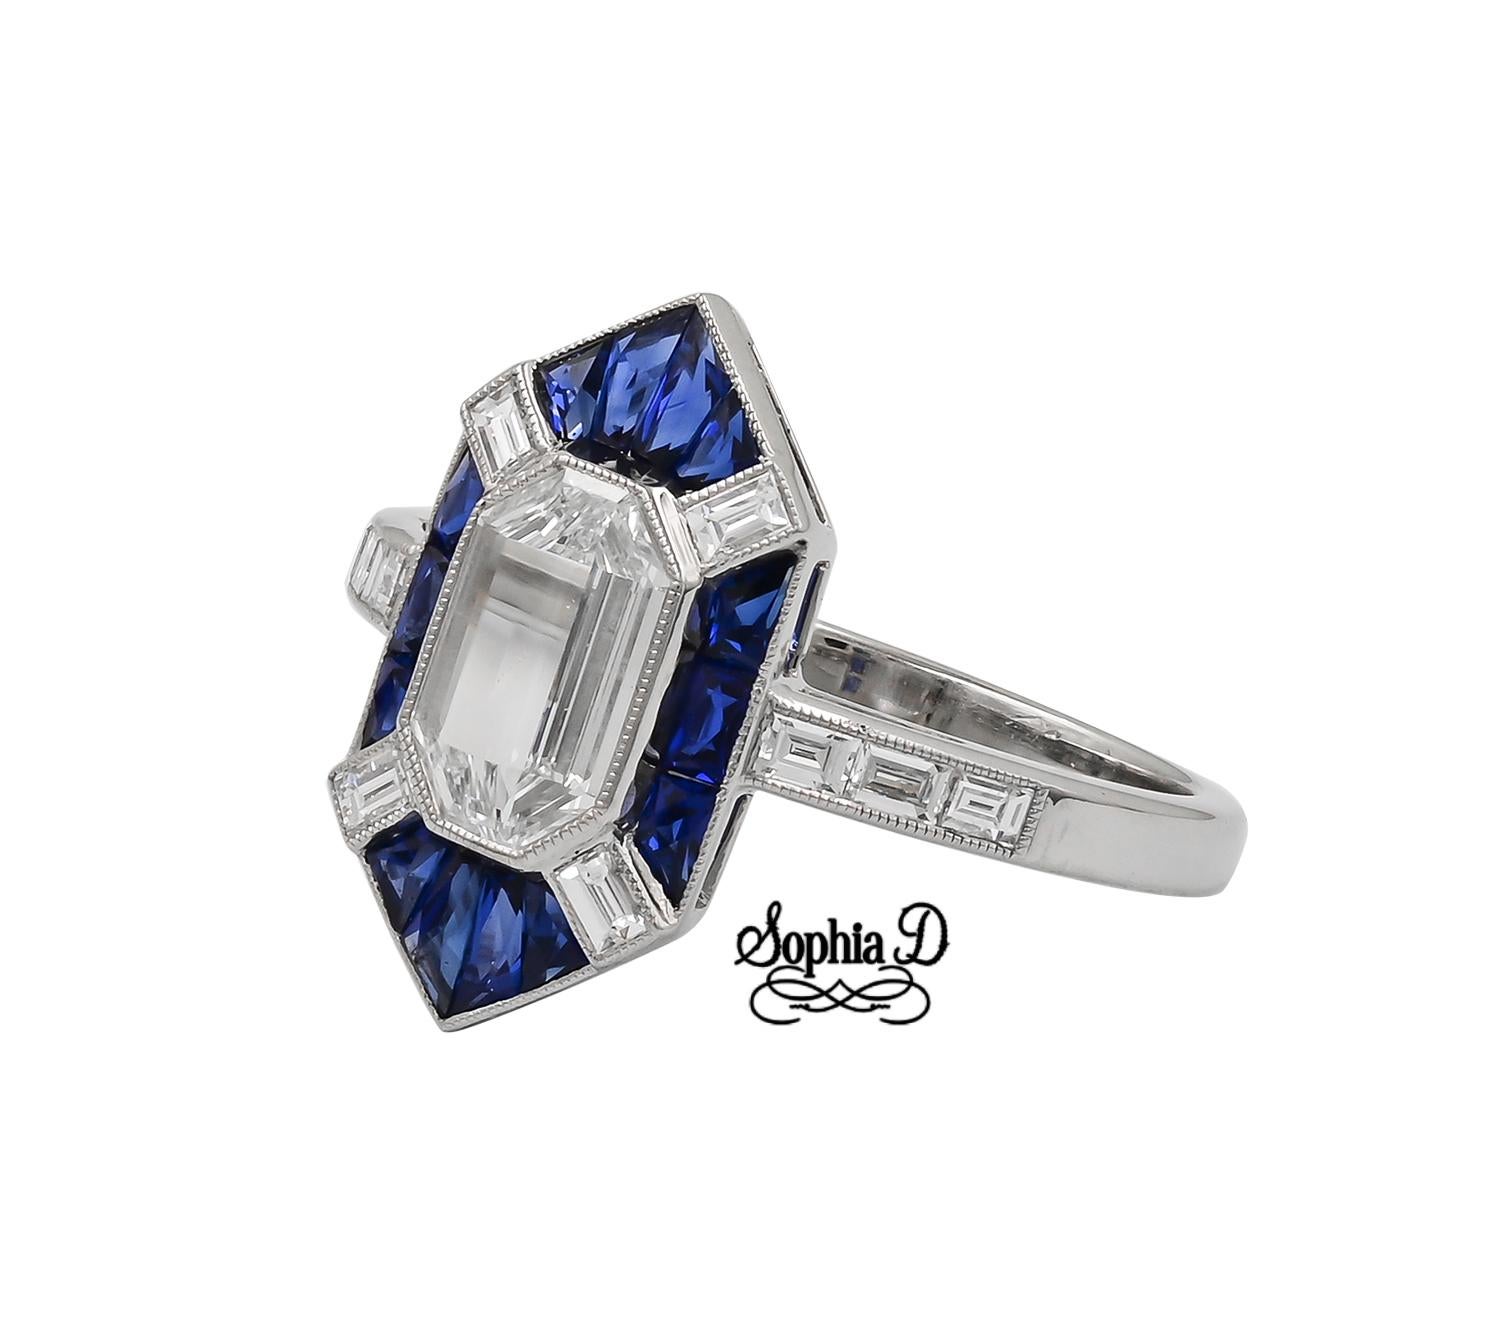 This Art Deco inspired platinum ring by Sophia D. features a 1.00 carat center diamond accentuated with .70 carat of blue sapphire and 0.32 carat small diamonds. Available for resizing.

Sophia D by Joseph Dardashti LTD has been known worldwide for